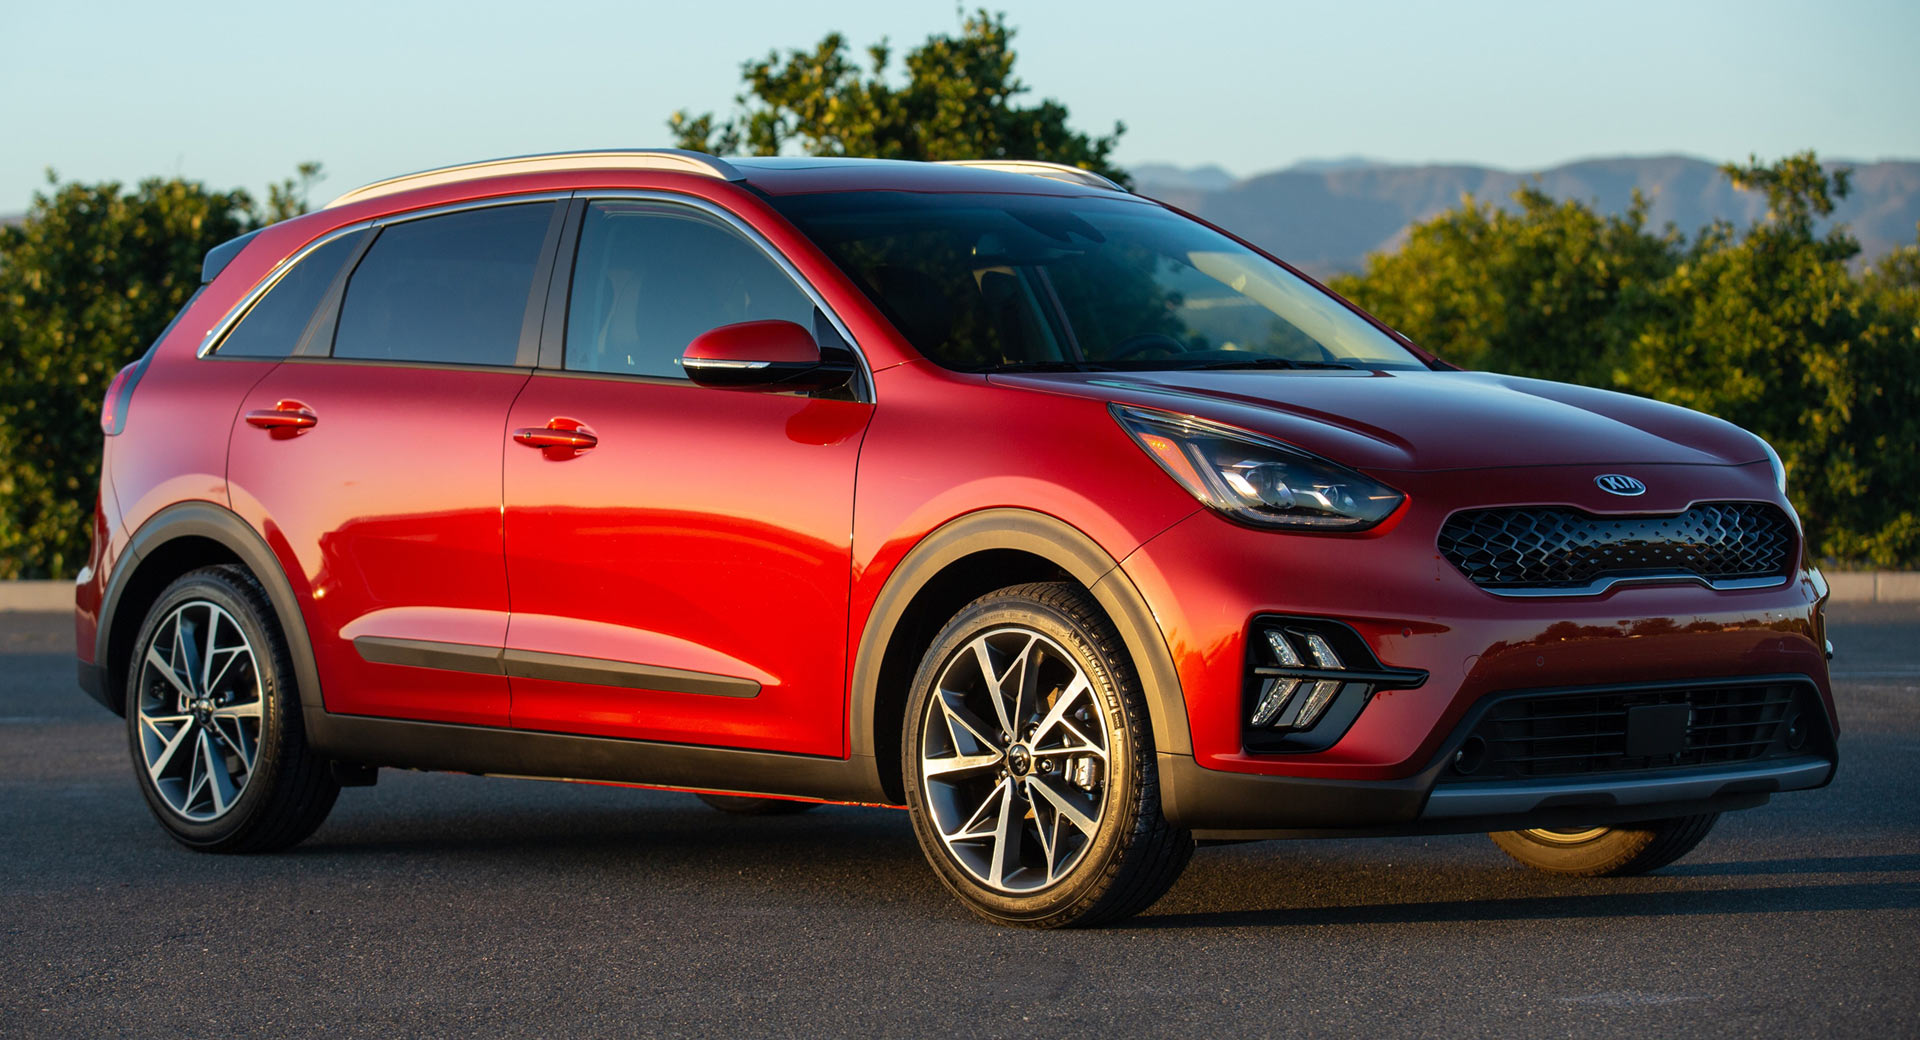 2021 Kia Niro Hybrid And Plug-In Hybrid Arrive With New Tech | Carscoops